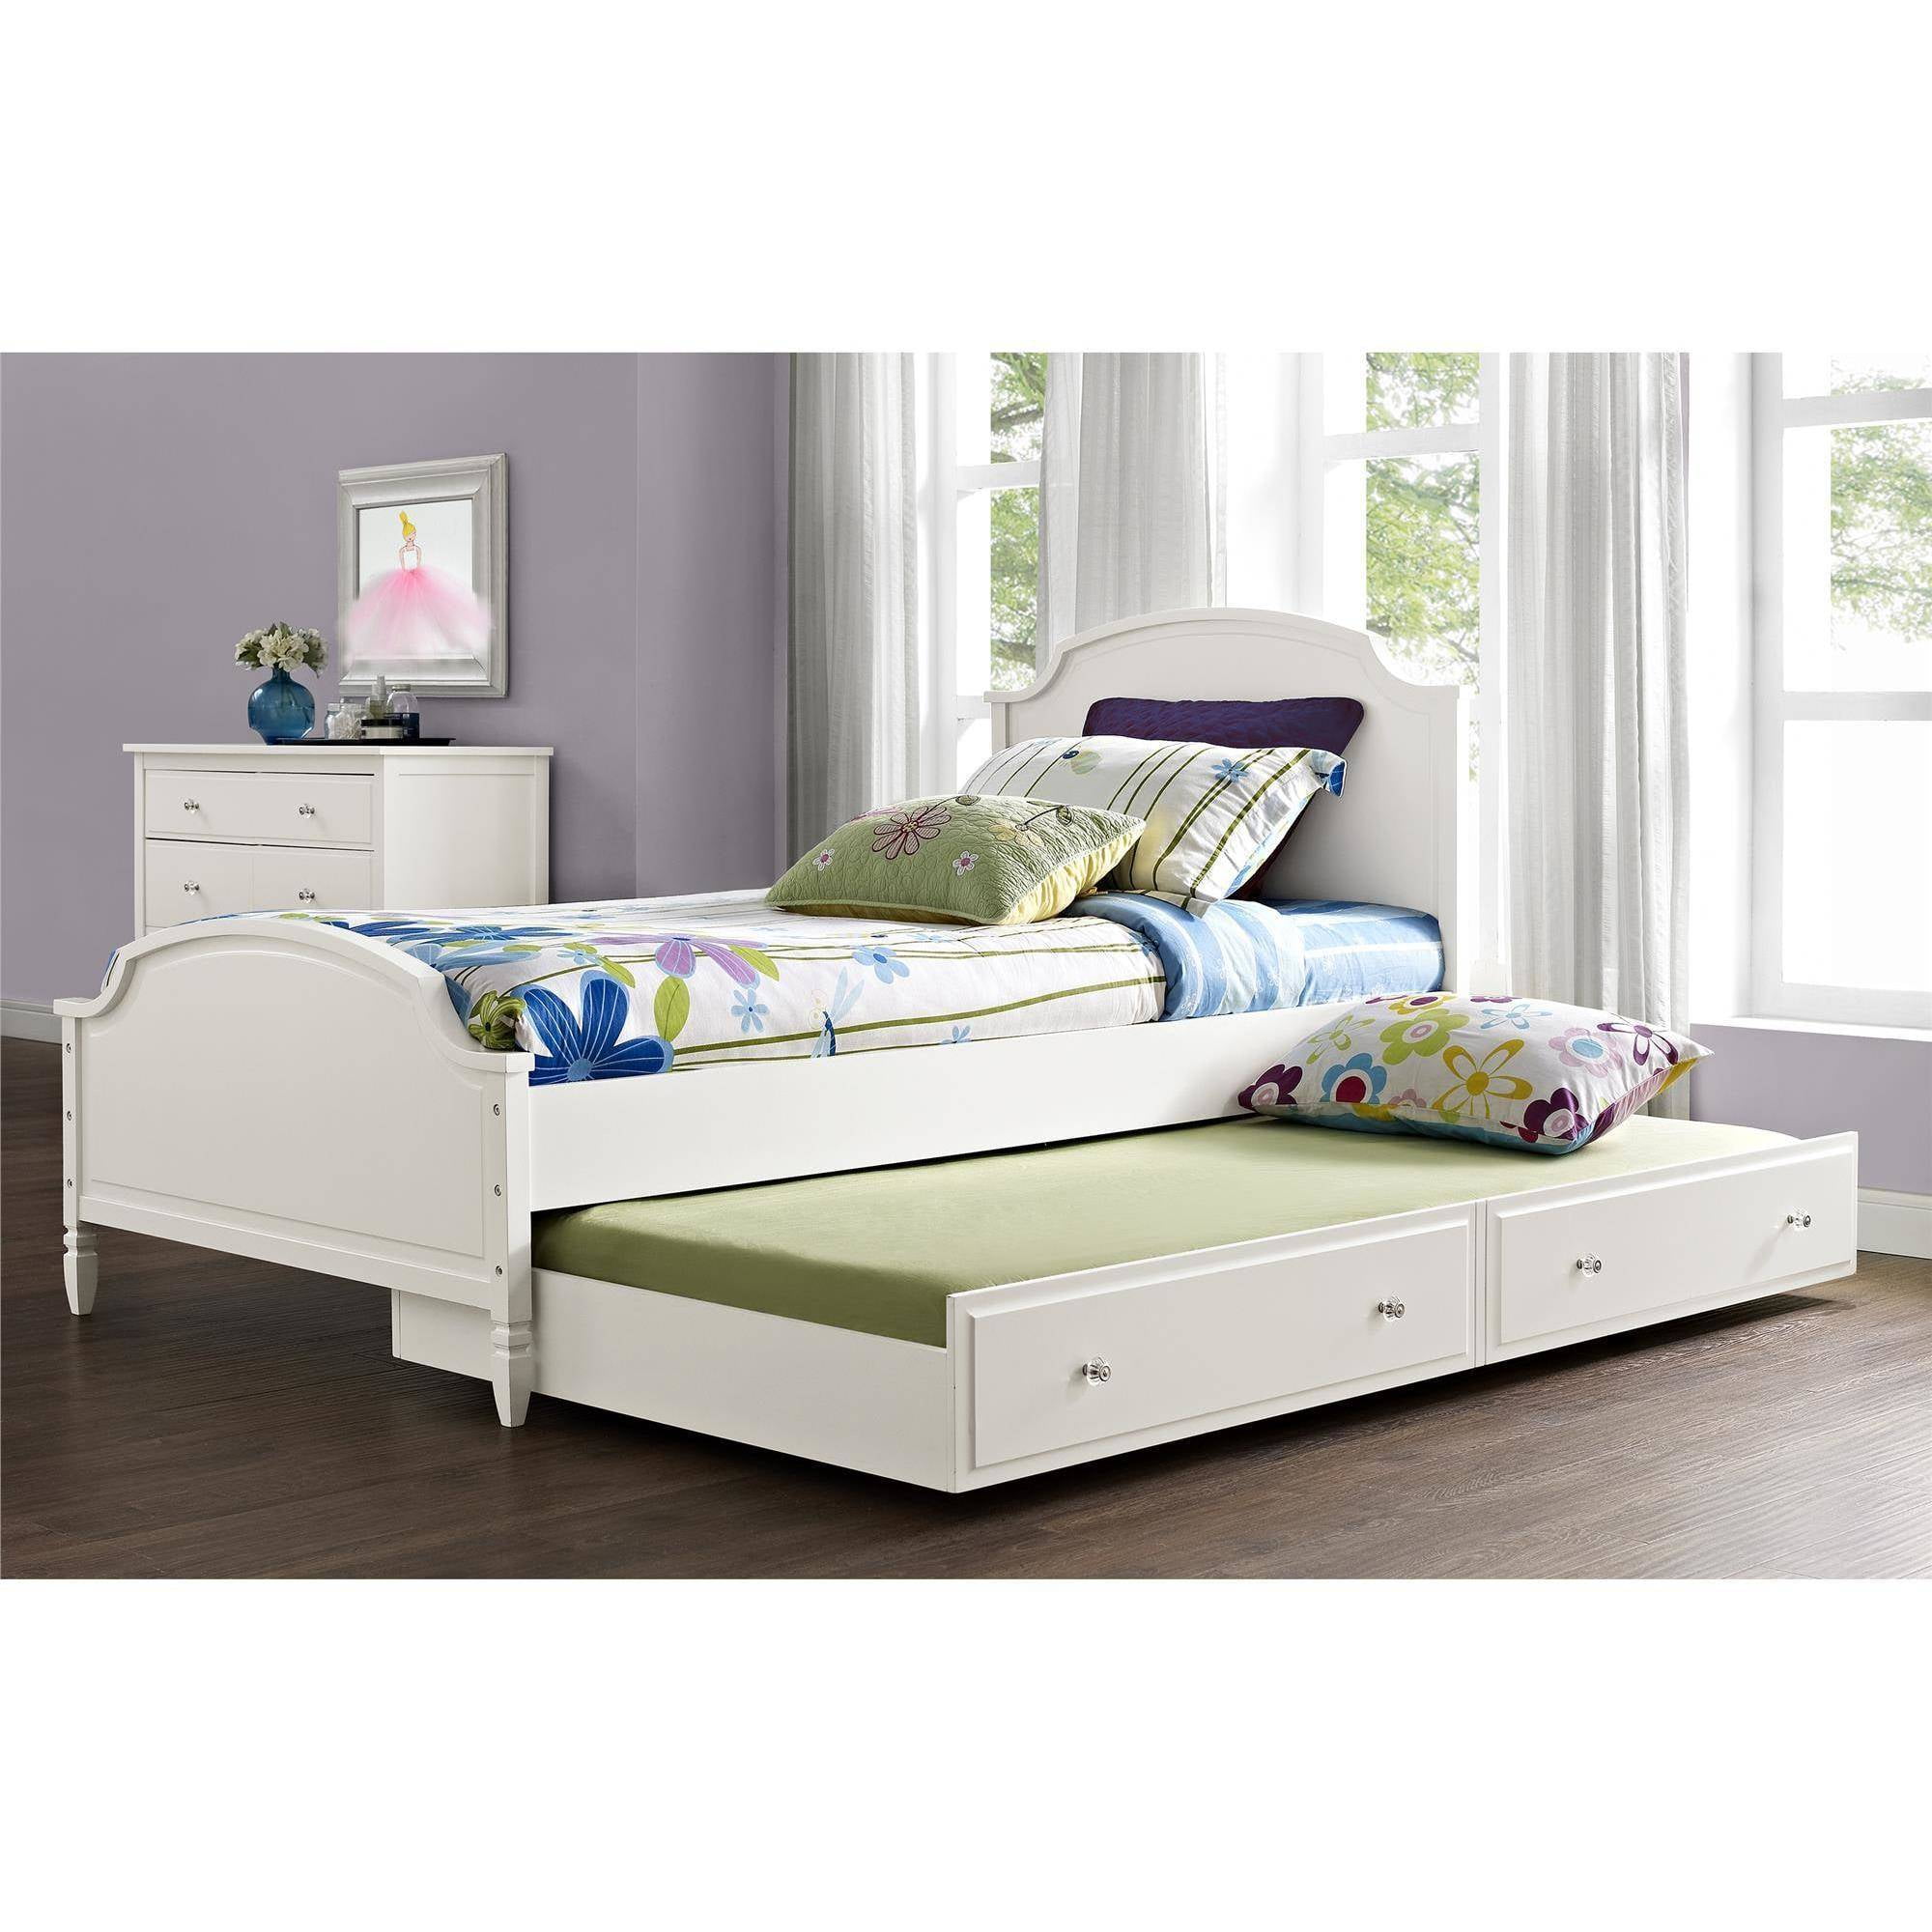 girls full bed with trundle